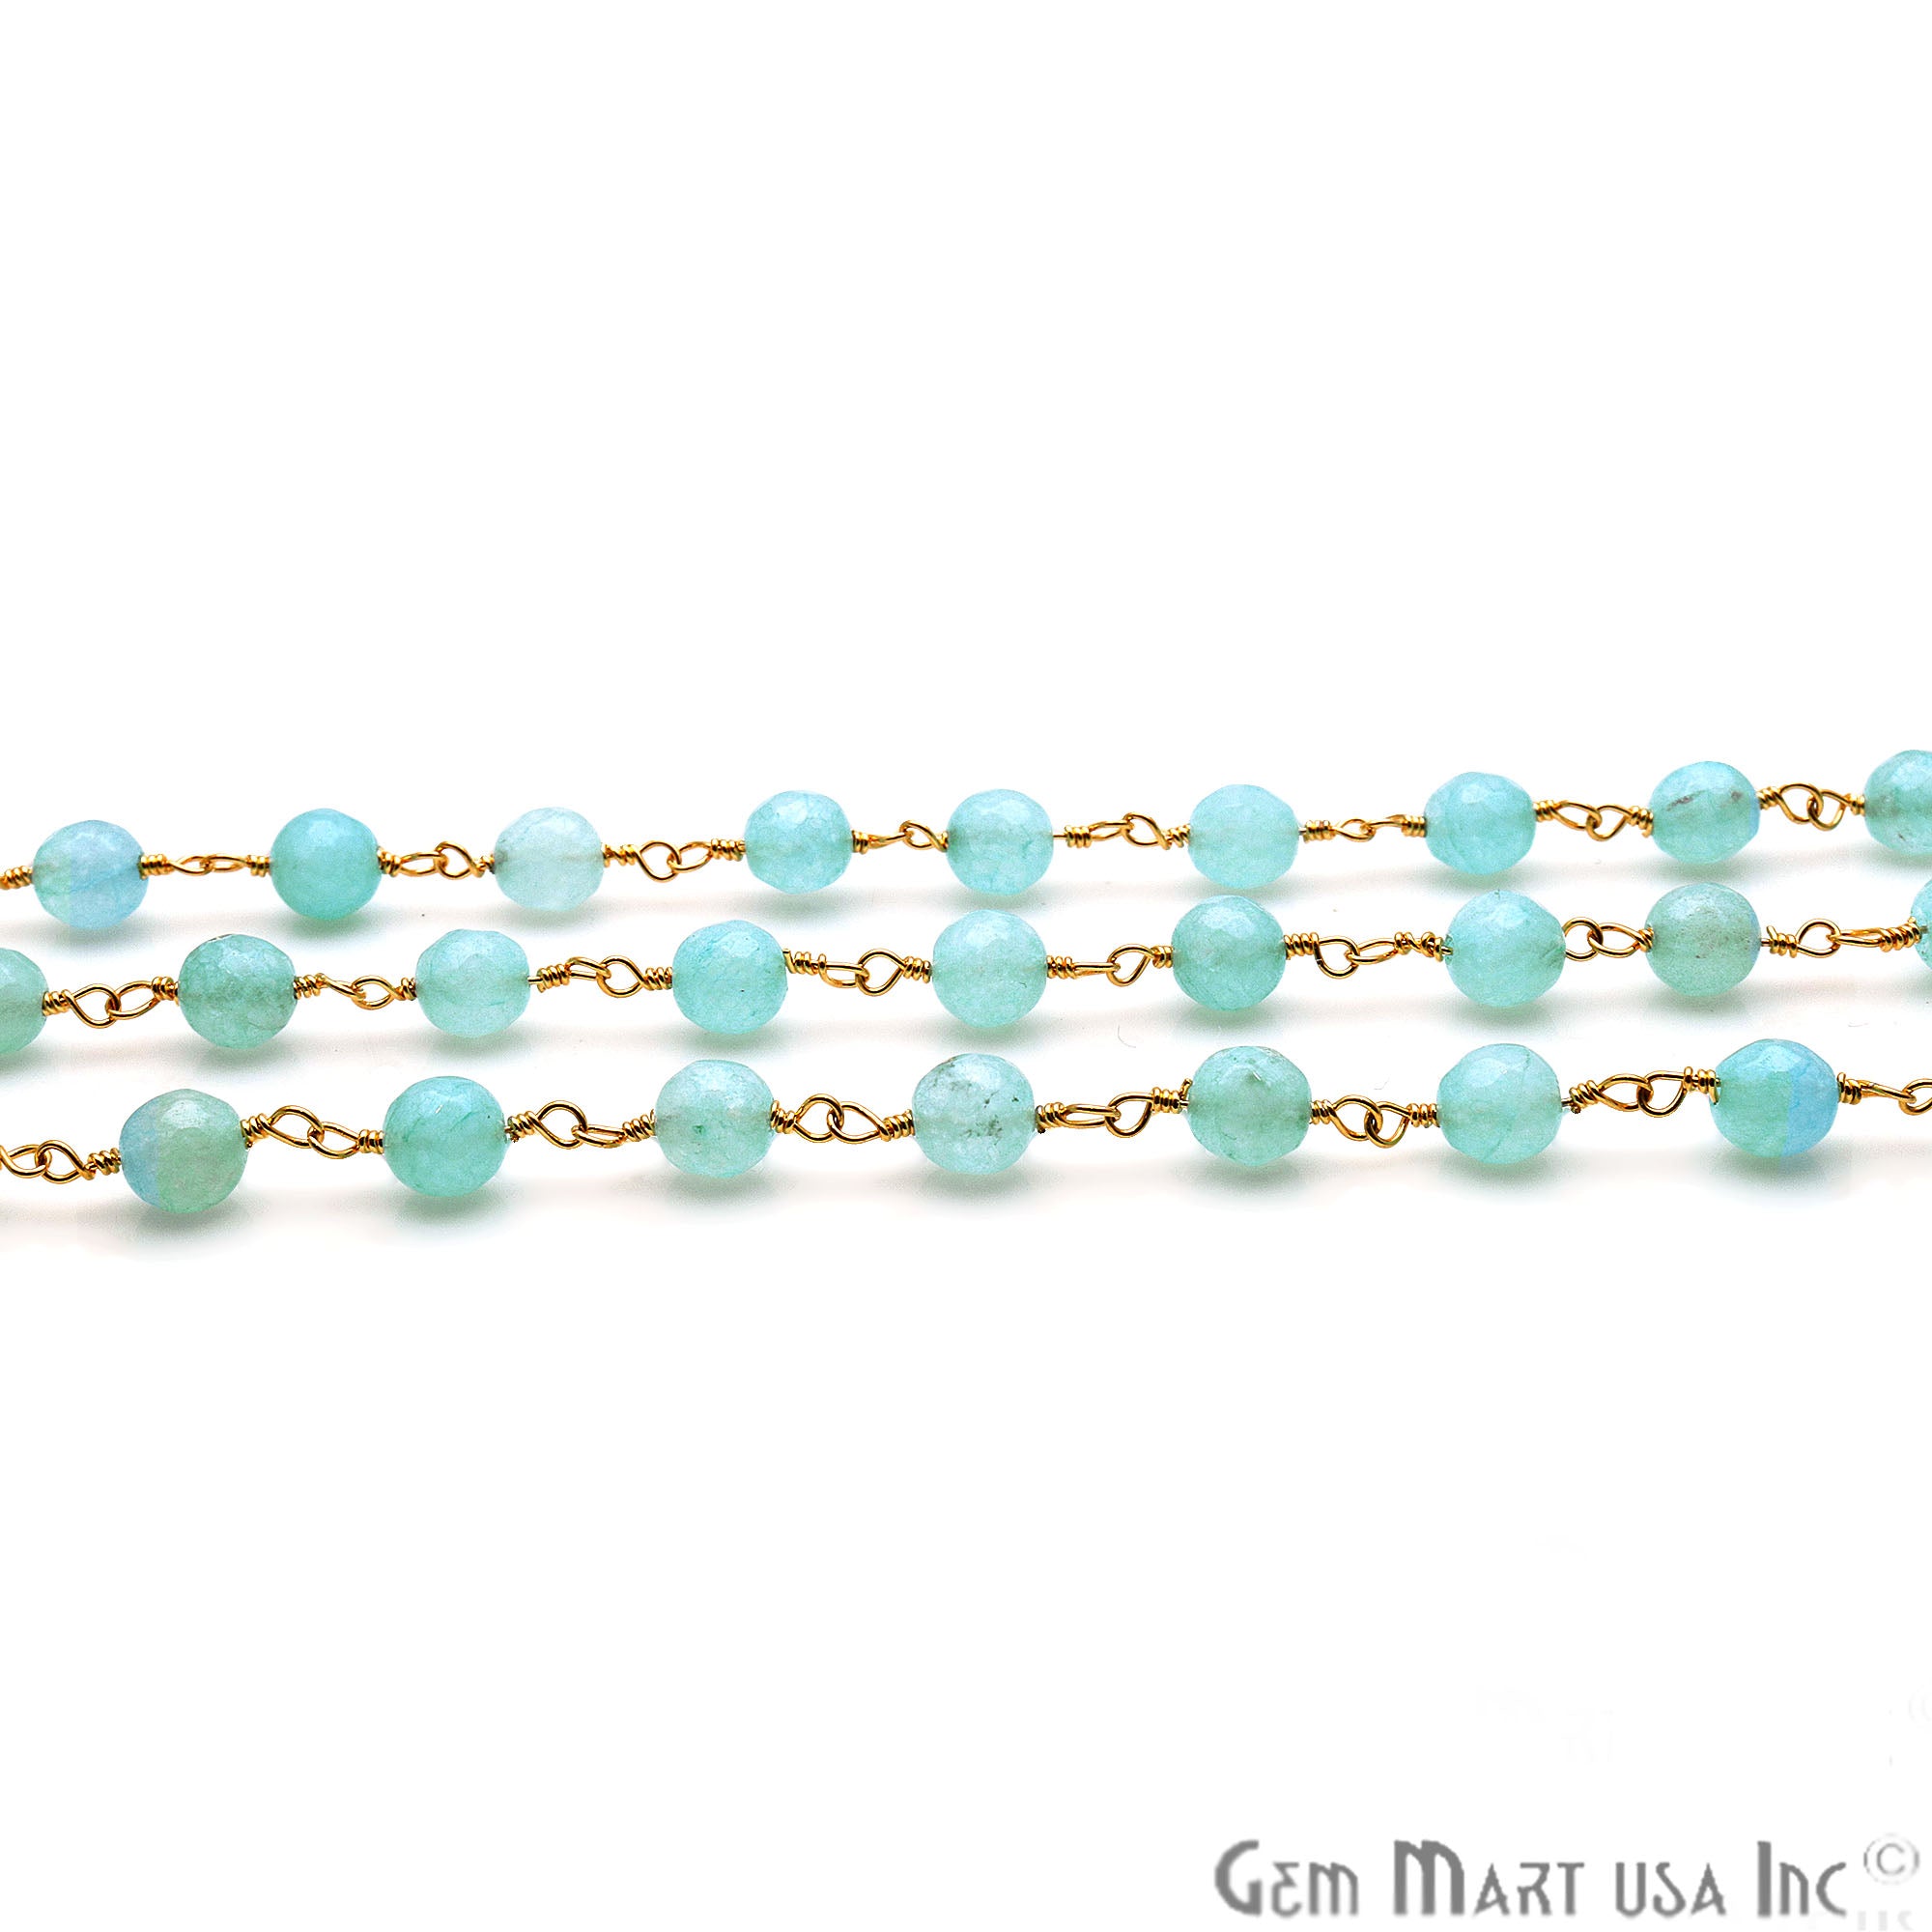 Turquoise Green Jade Faceted Beads 6mm Gold Wire Wrapped Rosary Chain - GemMartUSA